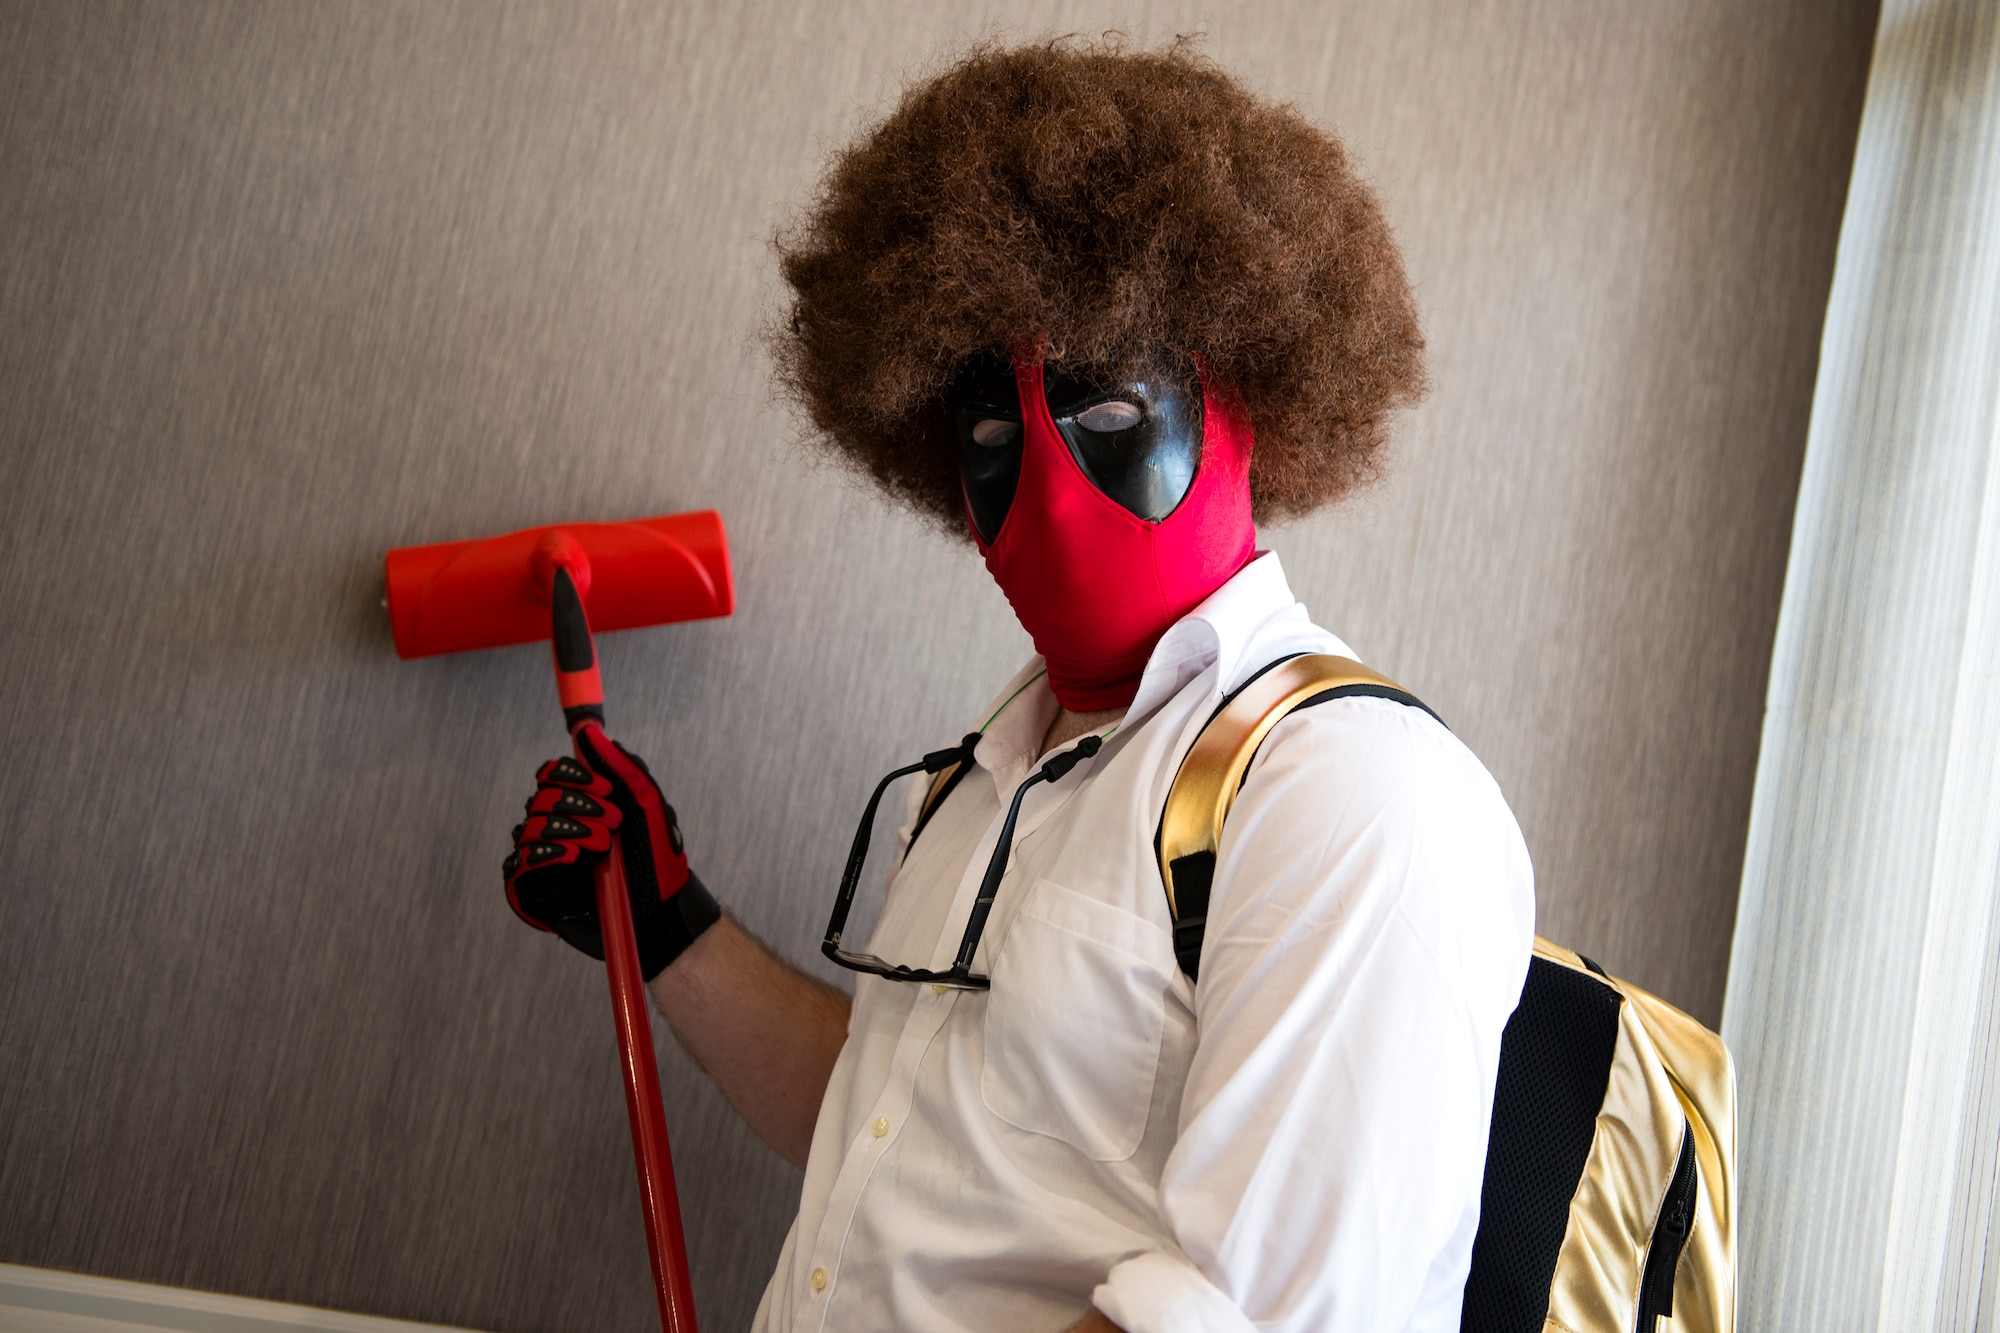 Jeffrey Goodall, cosplayer, poses for a photo while at Tiger Con, April 14, 2018, in Valdosta, Ga. Tiger Con was a convention, open to Moody residents and the local community, geared toward giving pop culture enthusiasts a chance to dress and role play as their favorite movie, TV show or comic characters. The event included a costume contest, an anime themed café, pop-culture artist panels along with shopping vendors and a guest appearance of veteran voice actor Richard Epcar, who’s known for portraying Raiden in the video series Mortal Kombat. (U.S. Air Force photo by Airman 1st Class Erick Requadt)